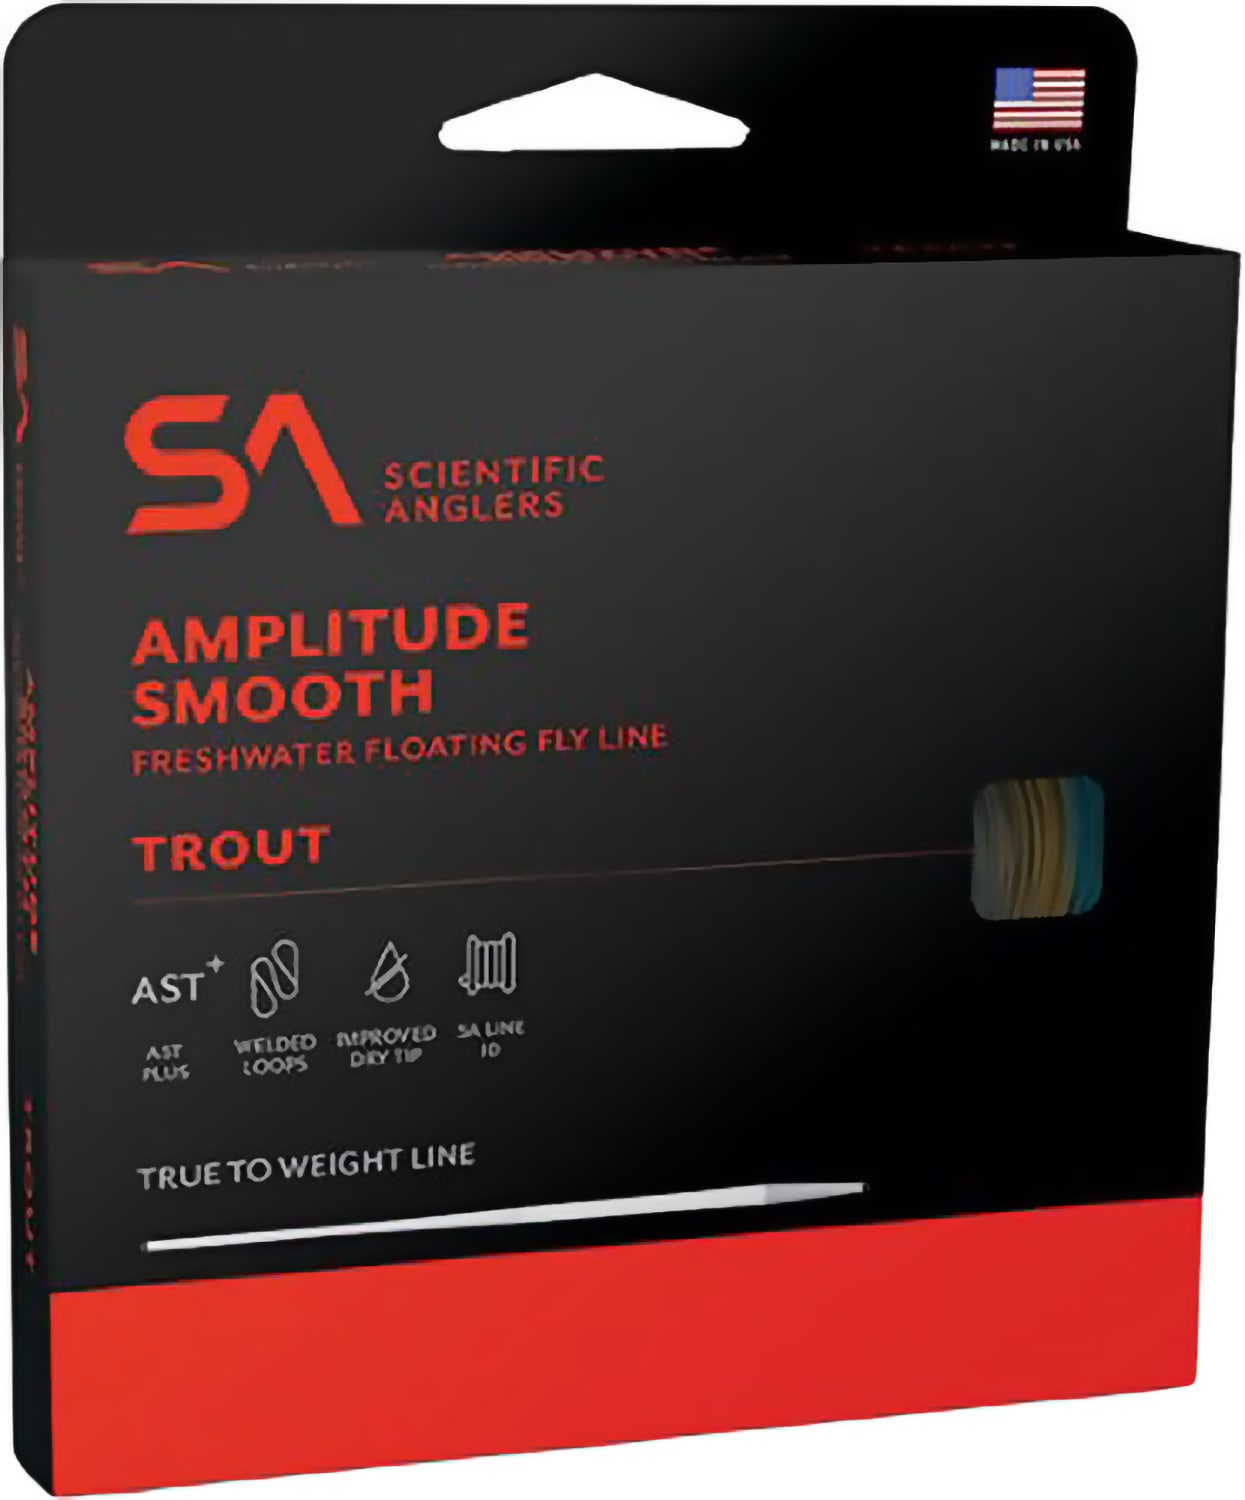 Scientific Anglers® Amplitude Smooth Trout Fly Line